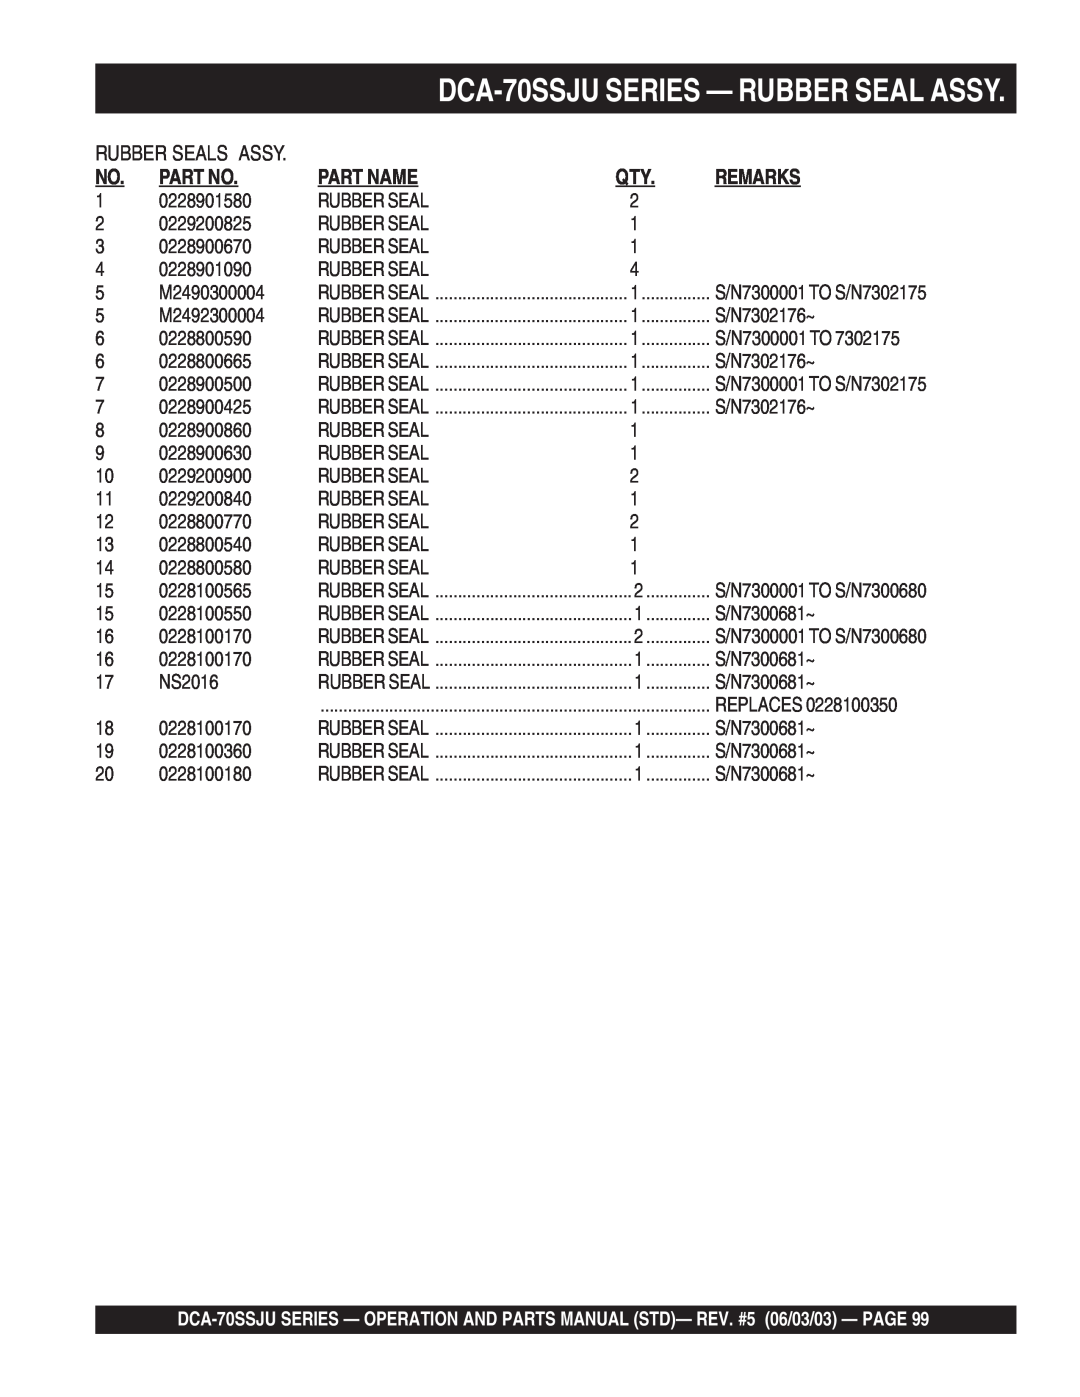 Multiquip operation manual DCA-70SSJUSERIES — RUBBER SEAL ASSY, Remarks, Part Name 